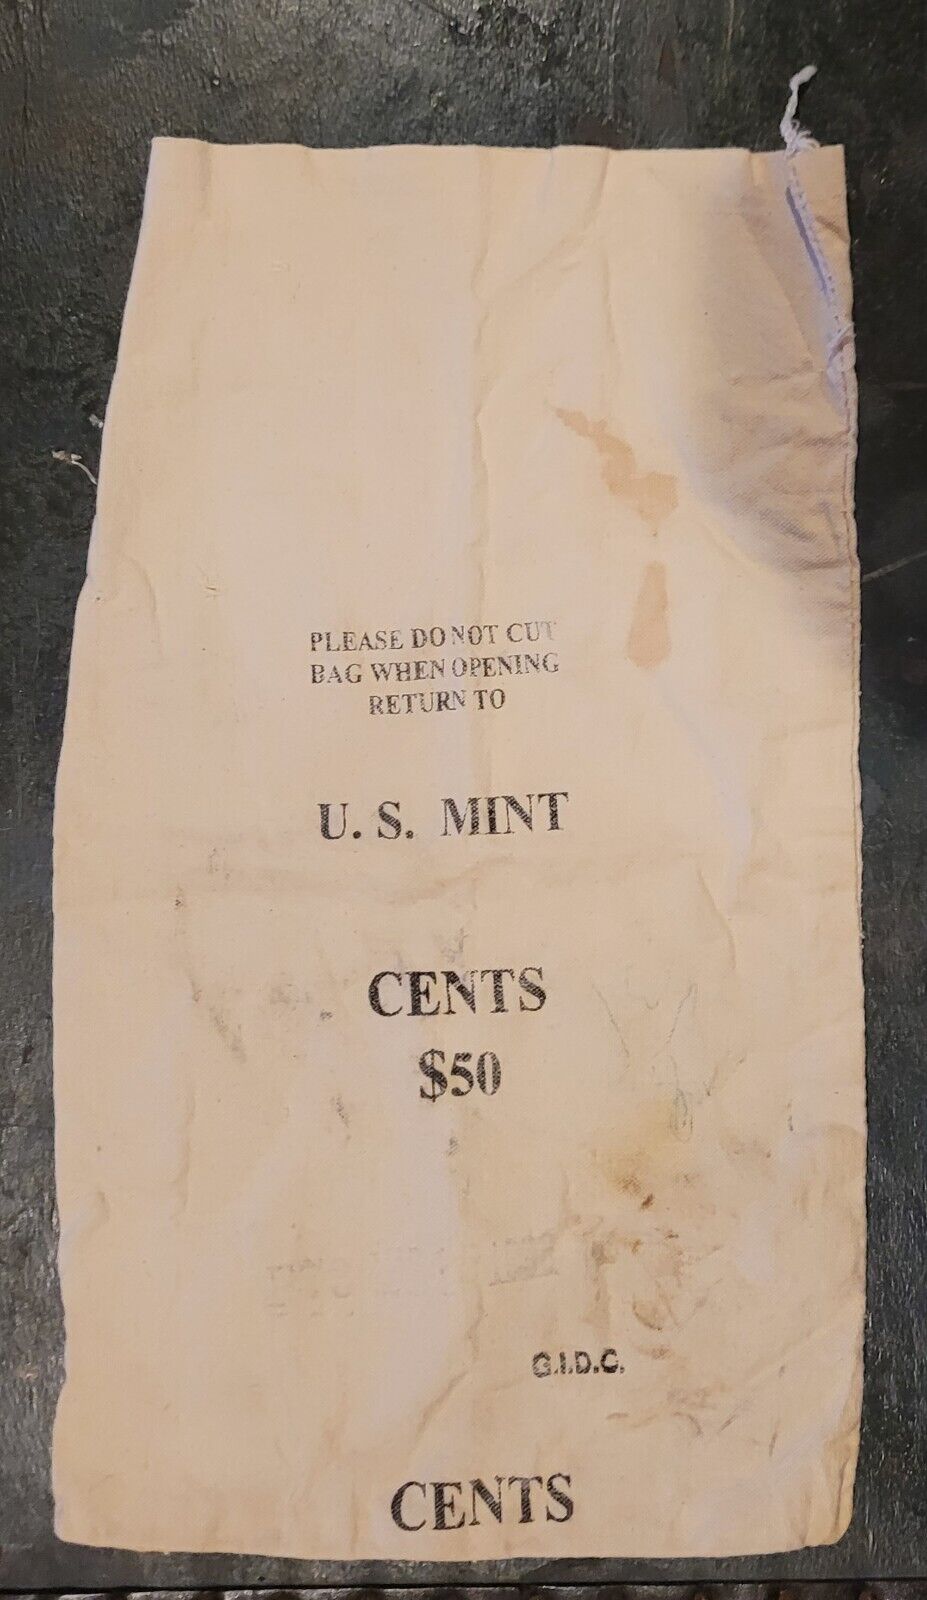 Vintage Canvas Coin Bag U.S. Mint Cents $50 About 17 in x 10 in - B